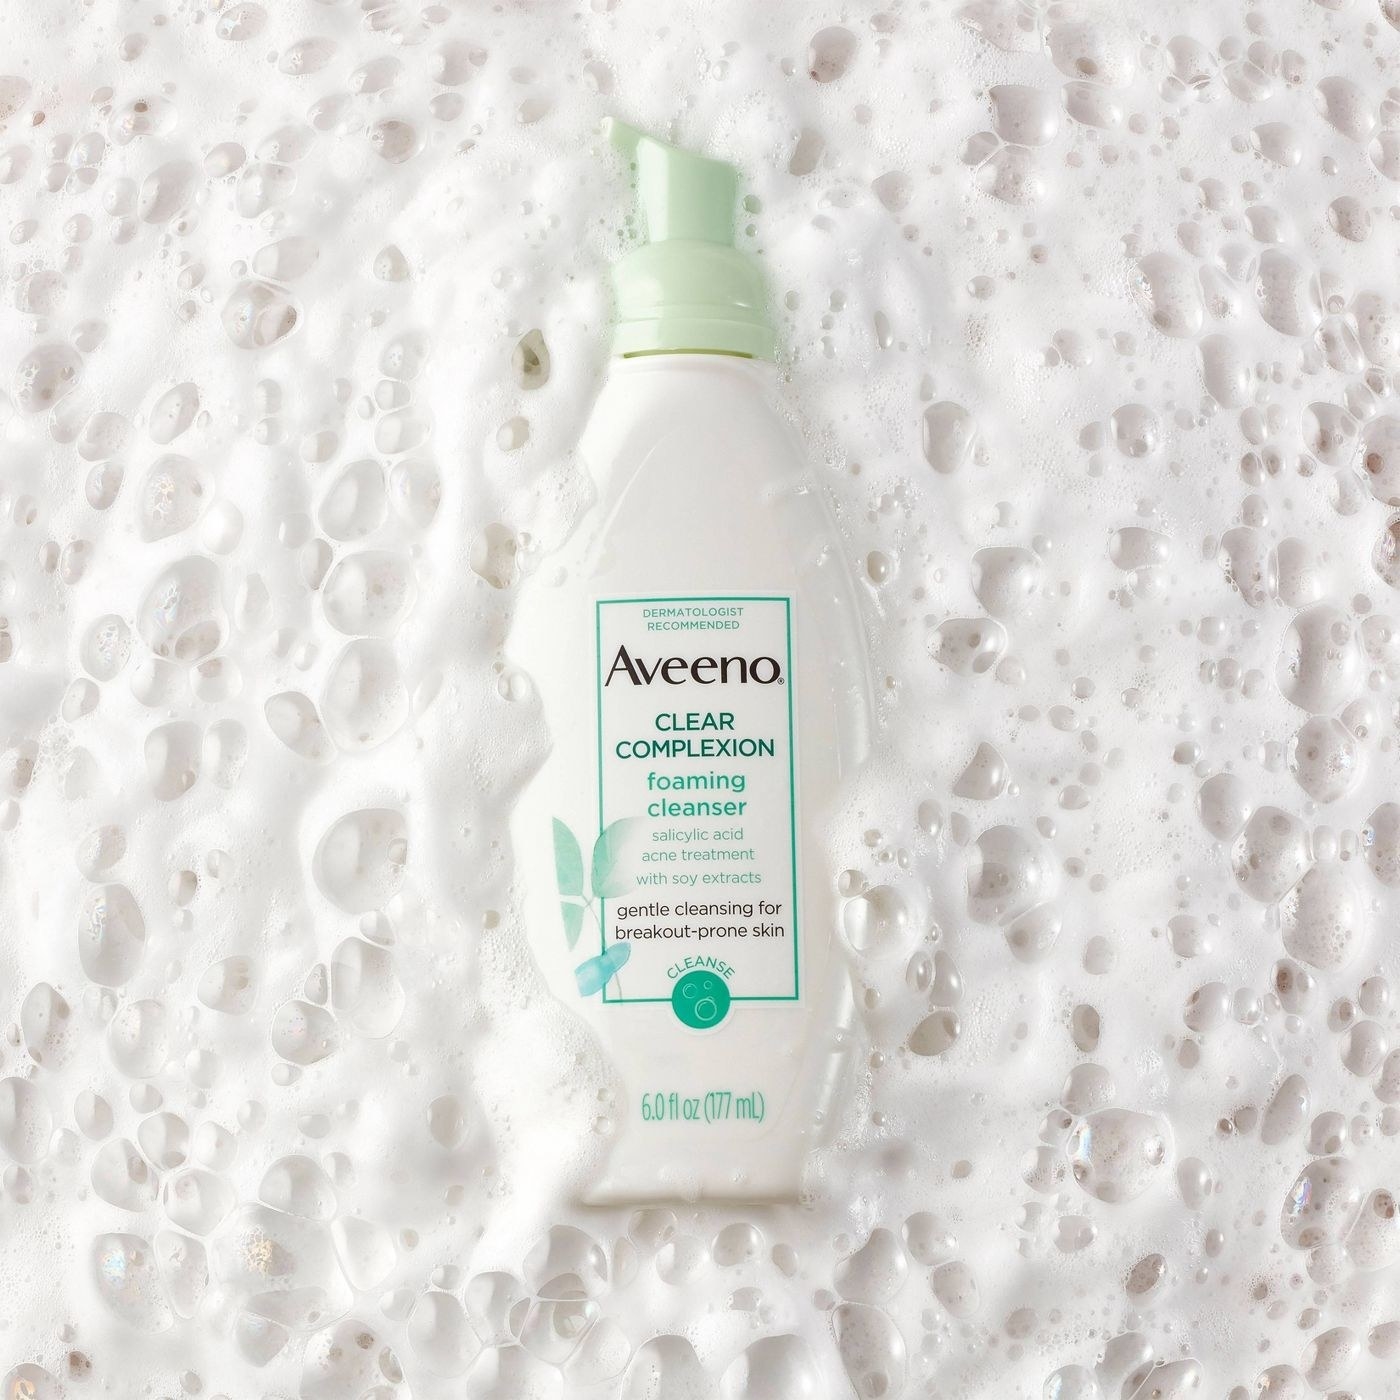 A bottle of foaming facial cleanser in a pile of soap suds